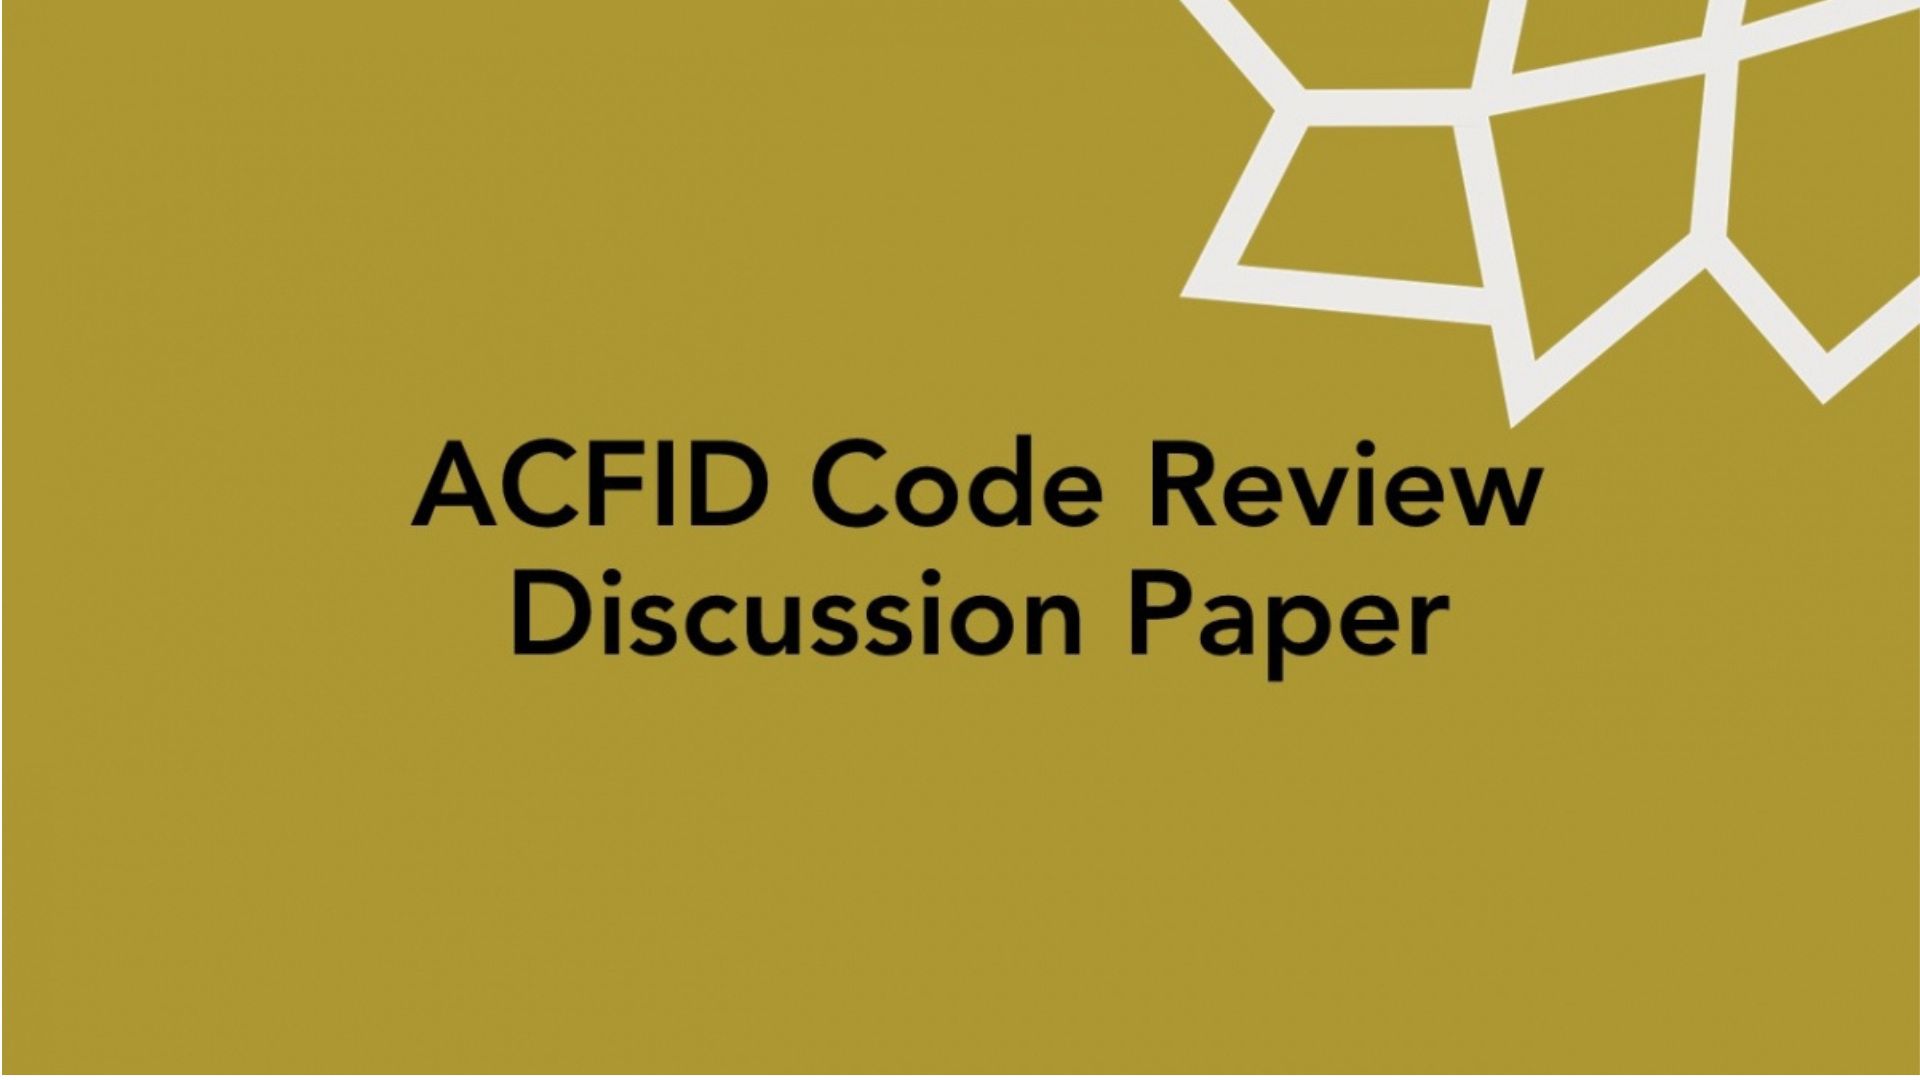 ACFID Code Review Discussion Paper - words on gold background